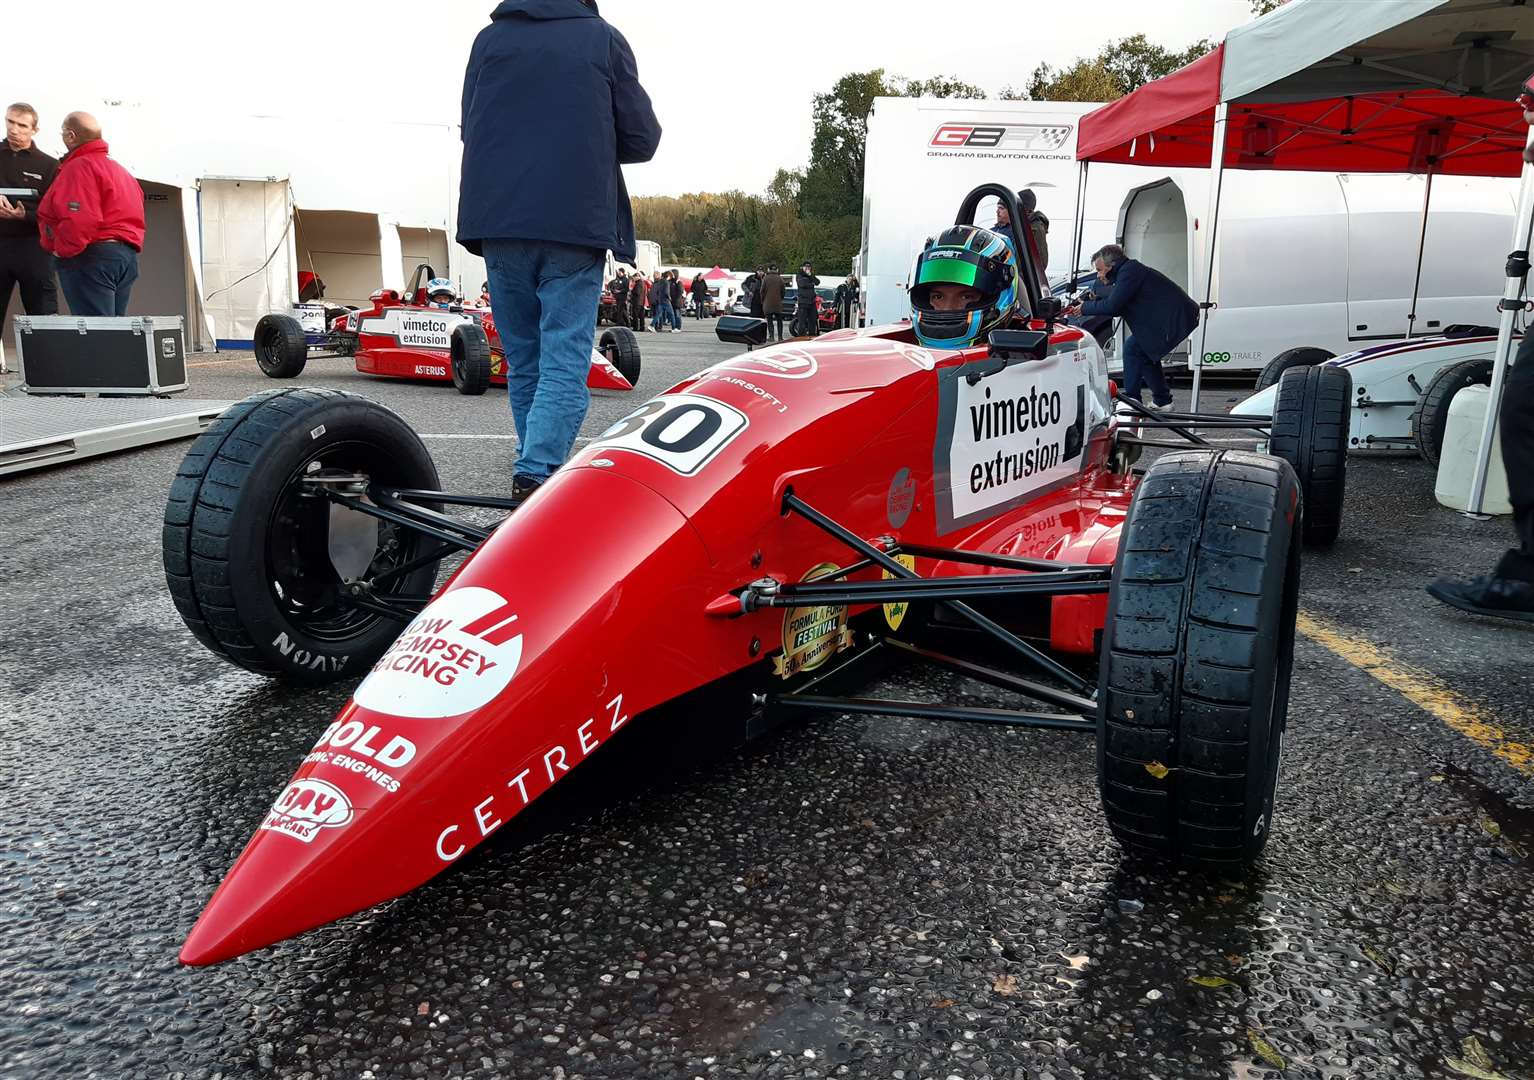 Low Dempsey Racing's Dennis Lind, the 2010 Festival winner, finished ninth on his return to Formula Ford 1600